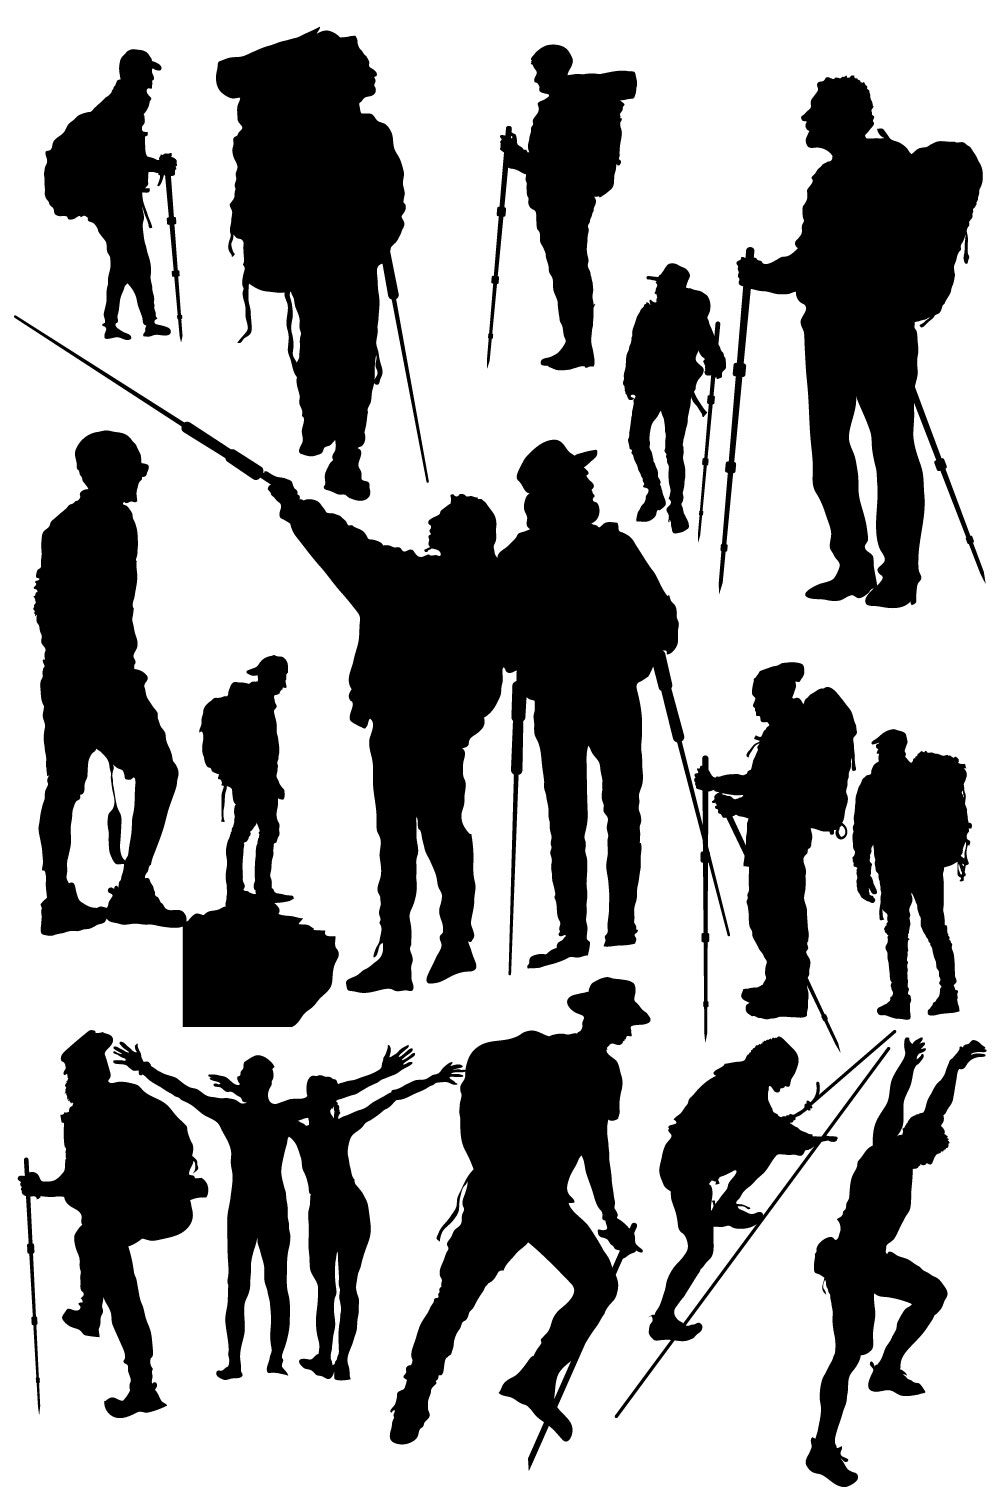 Climber hiker backpacker silhouette vector of a mountaineer pinterest preview image.